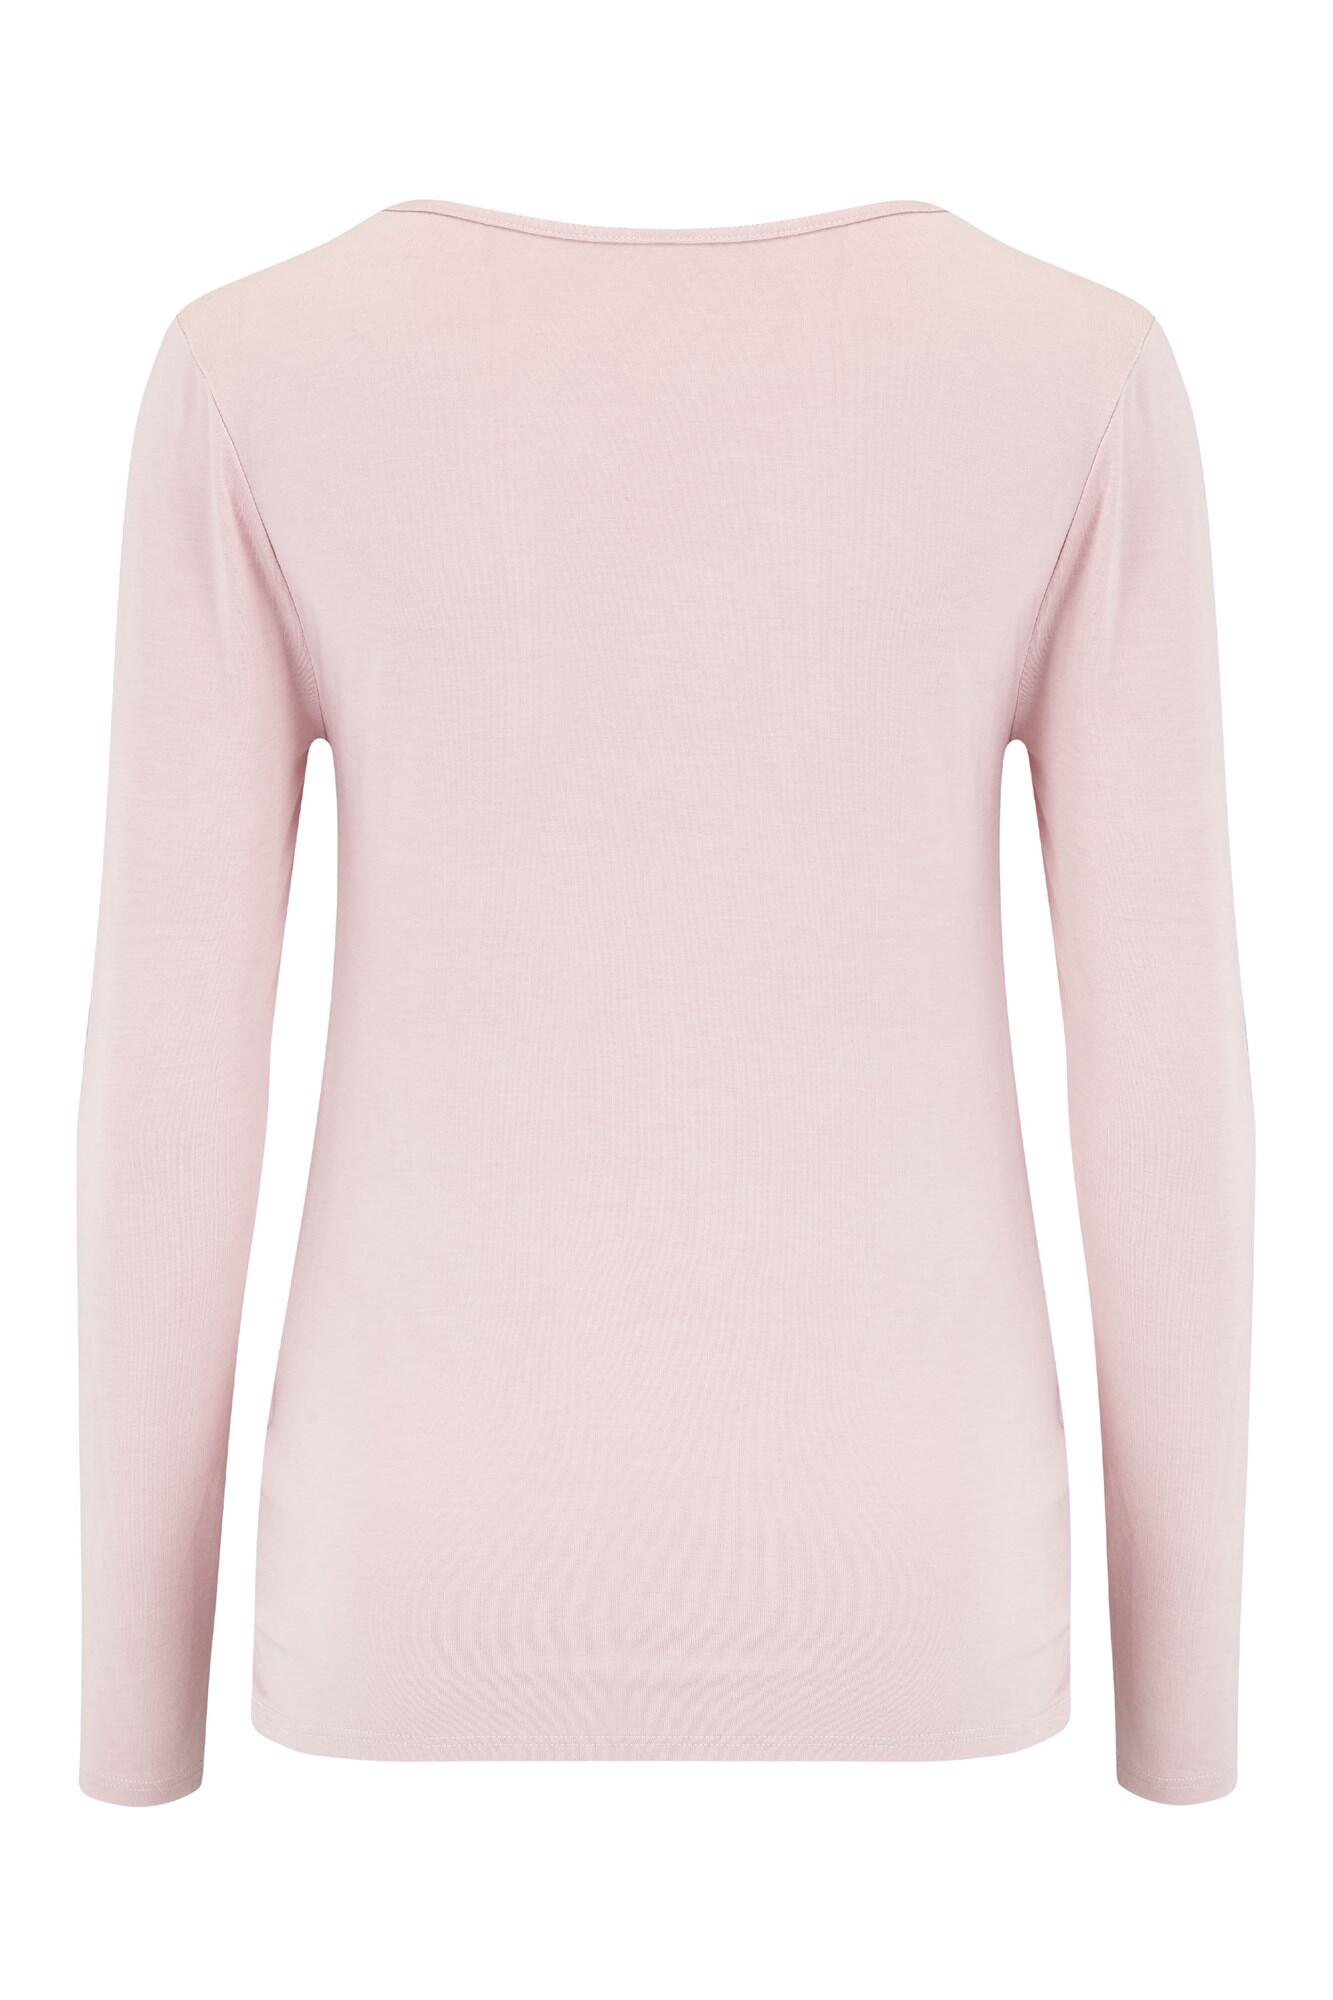 Second Skin Thermal Long Sleeve Top | Pink | Pour Moi